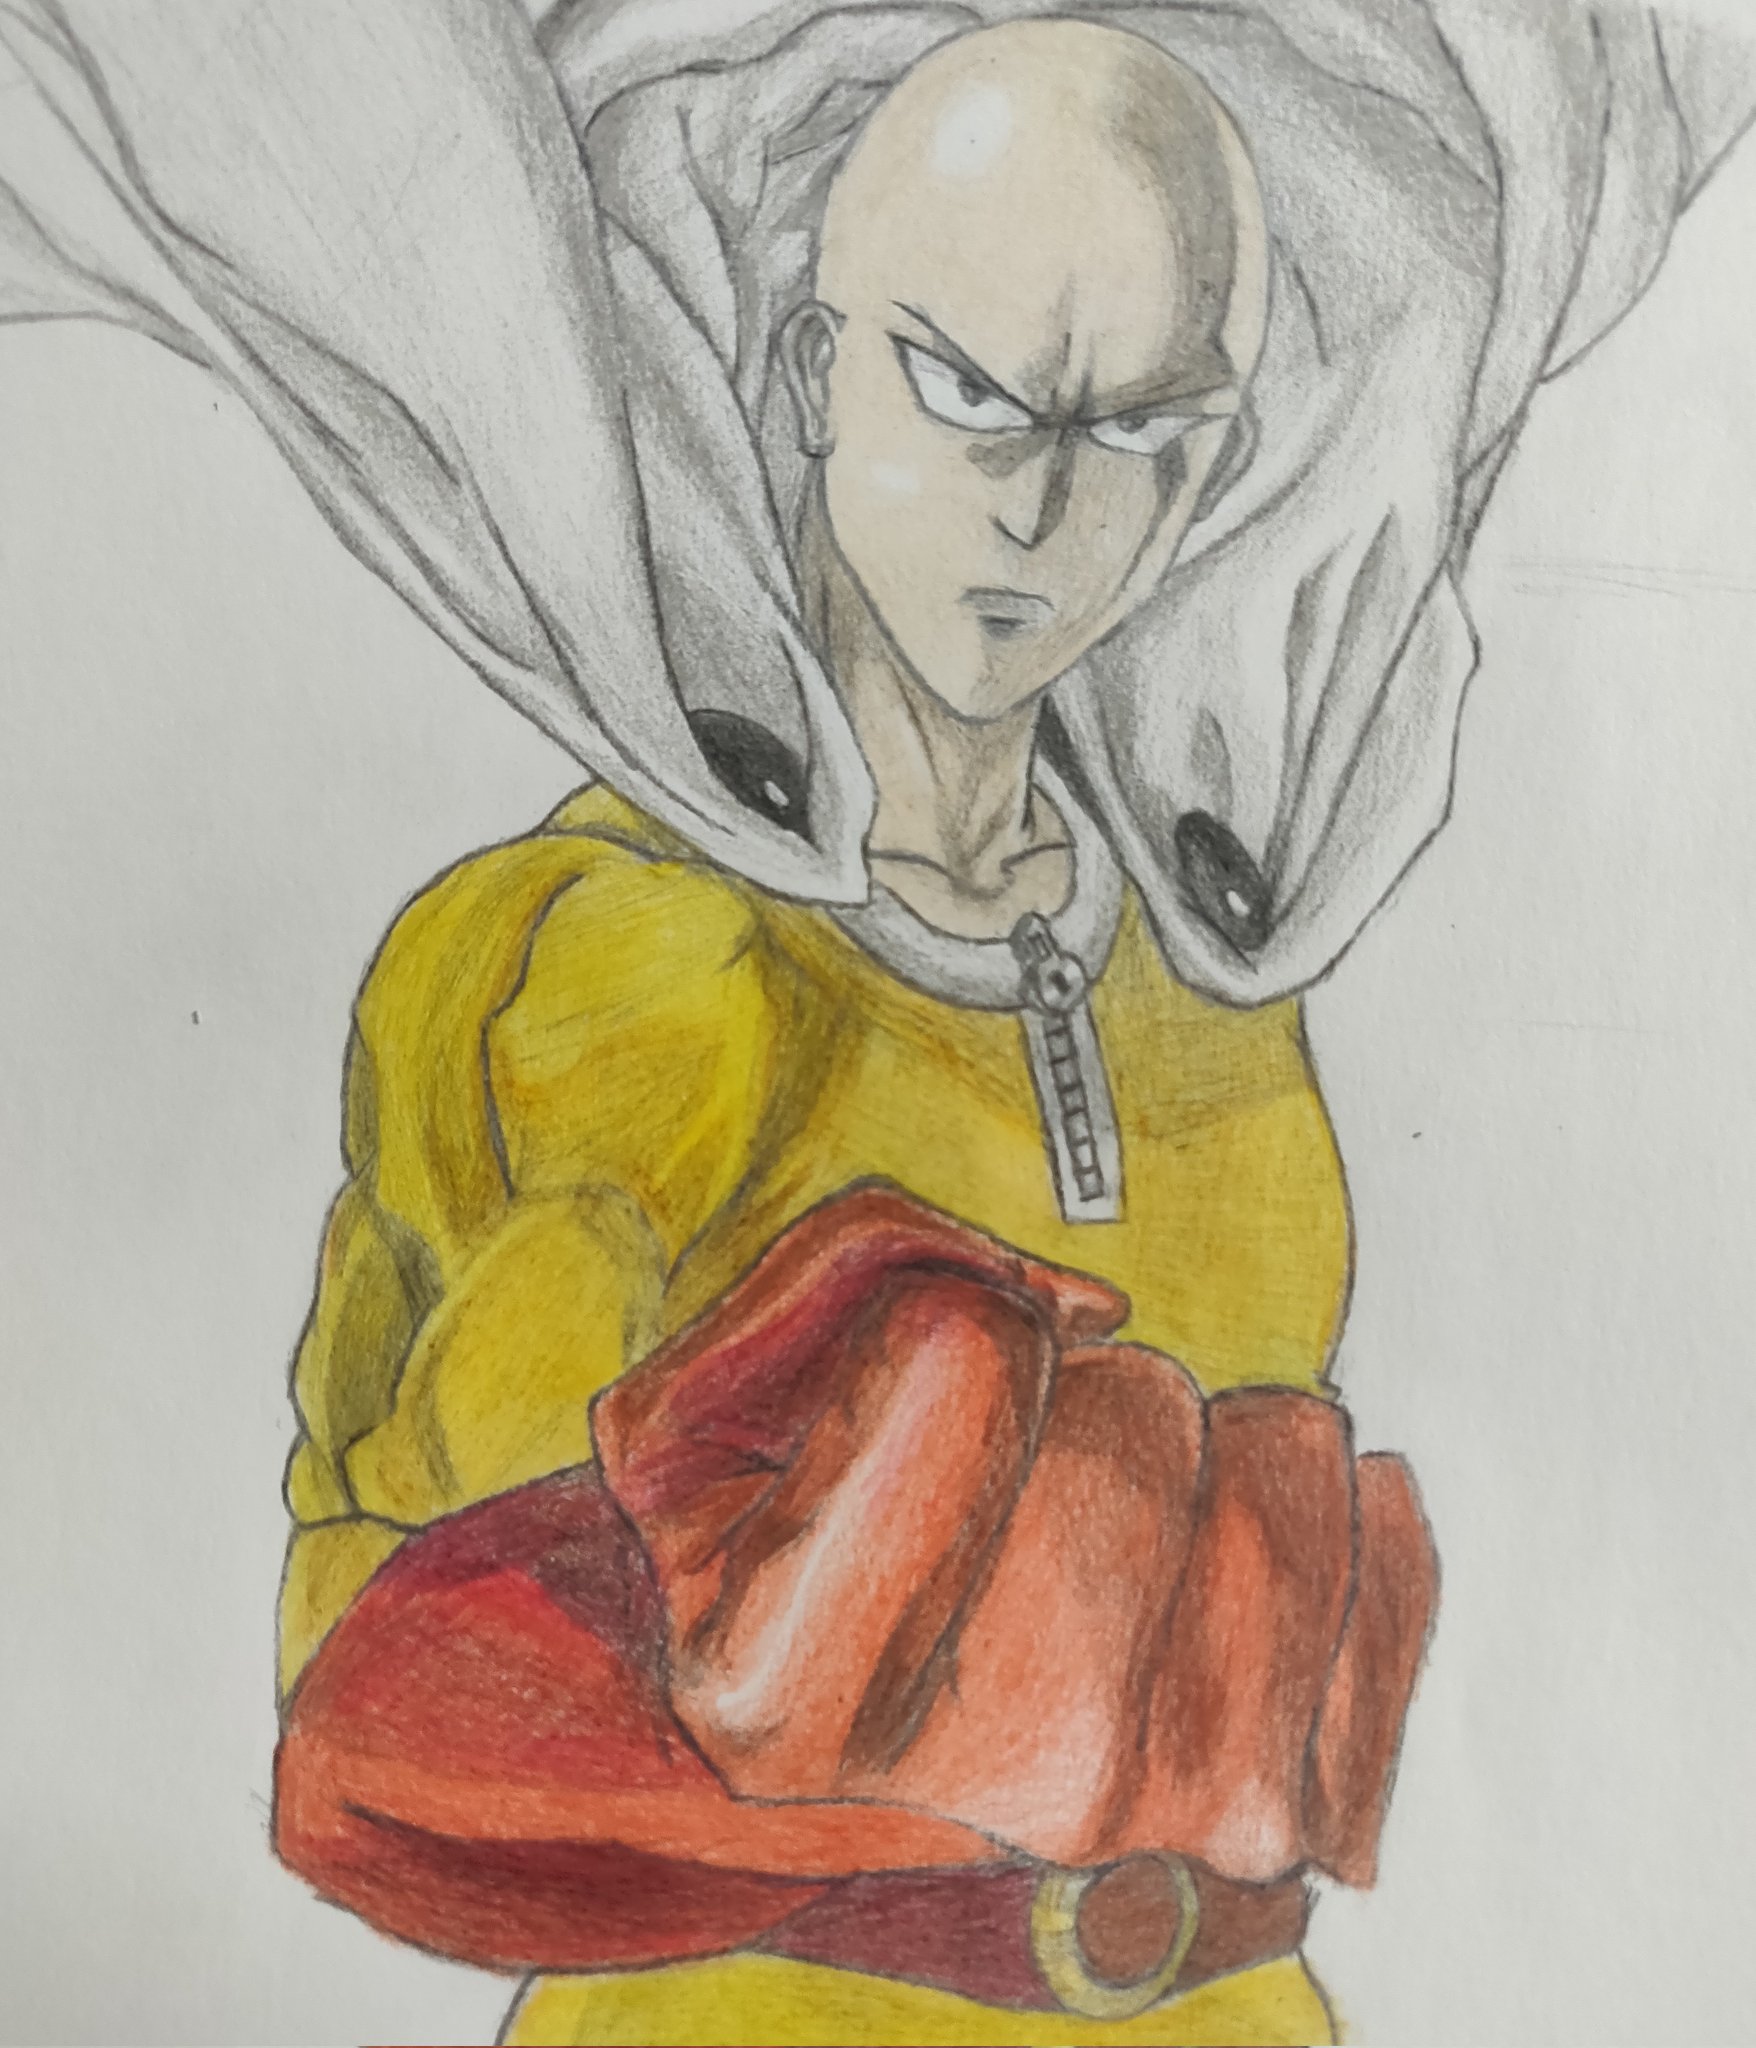 Memes  Easy To Draw Saitama One Punch Man Transparent PNG  724x825  Free  Download on NicePNG